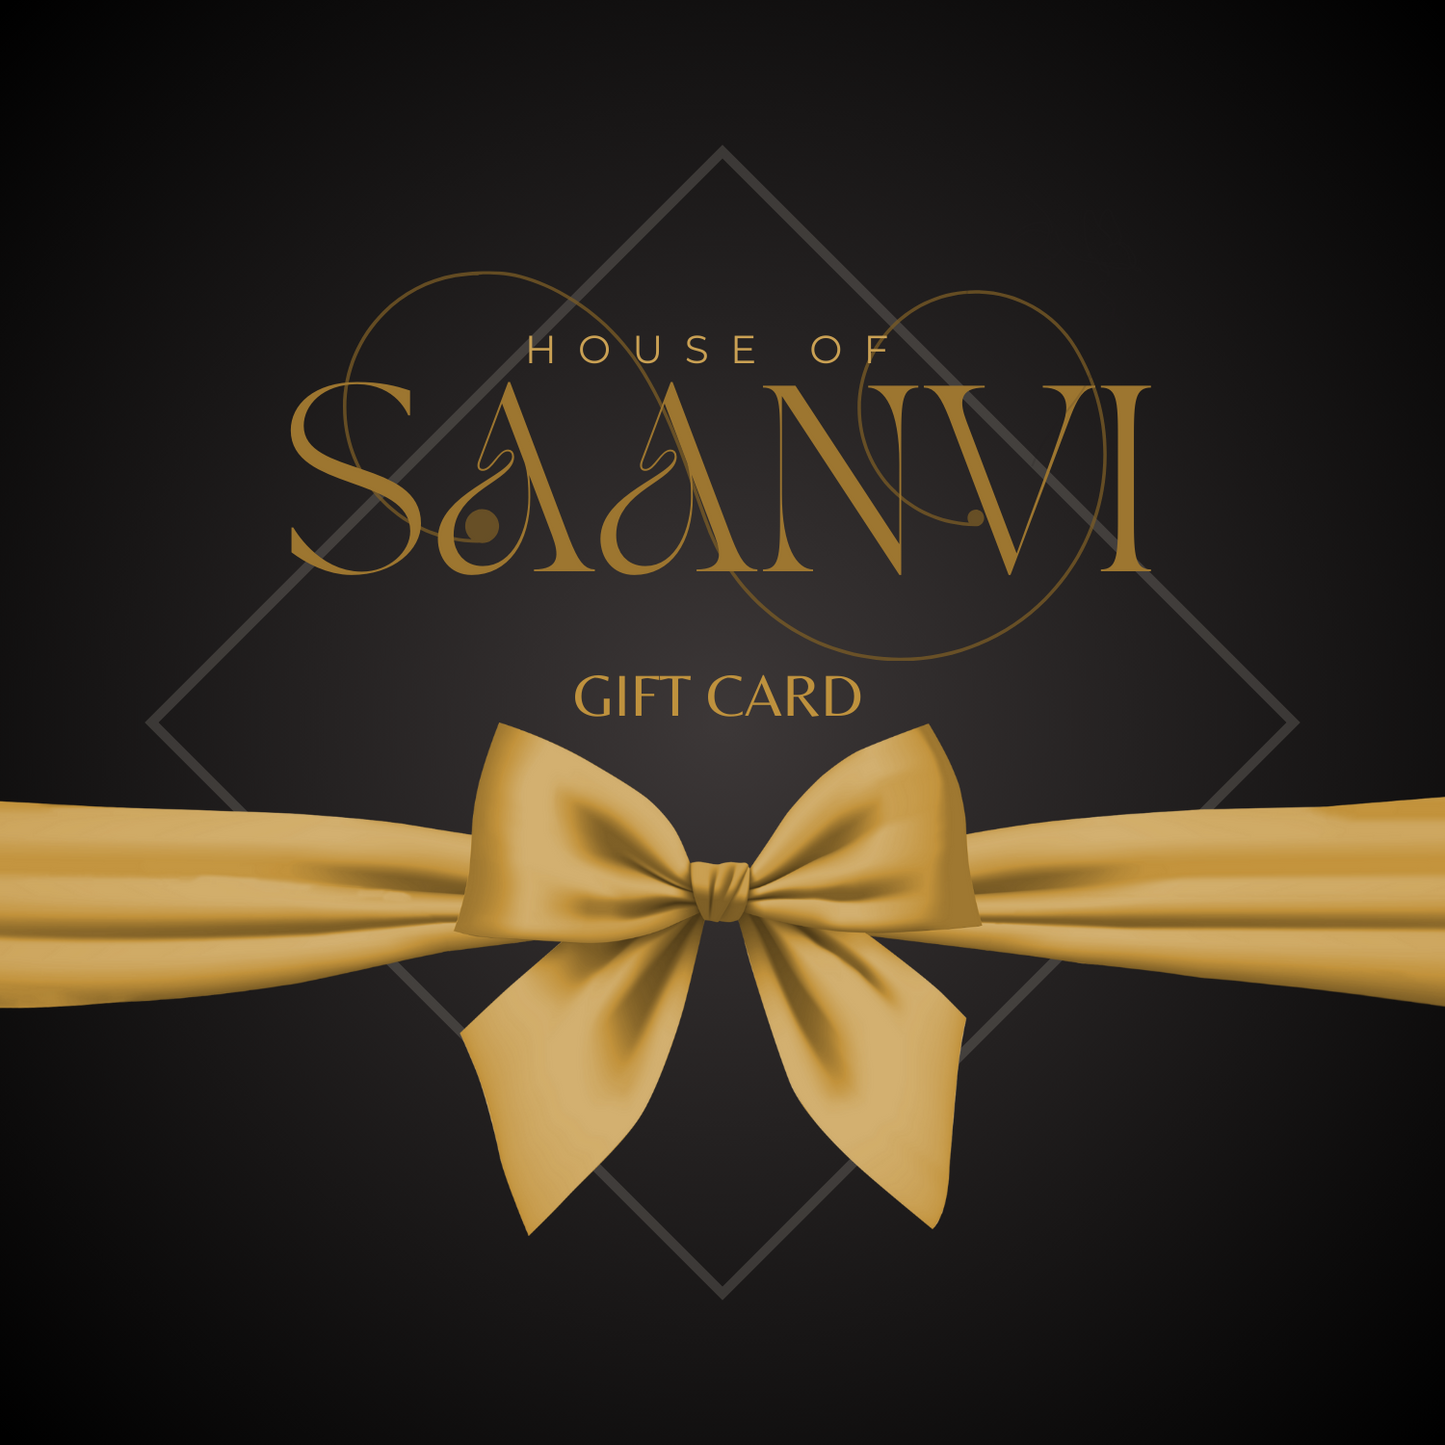 HOUSE OF SAANVI Gift Card